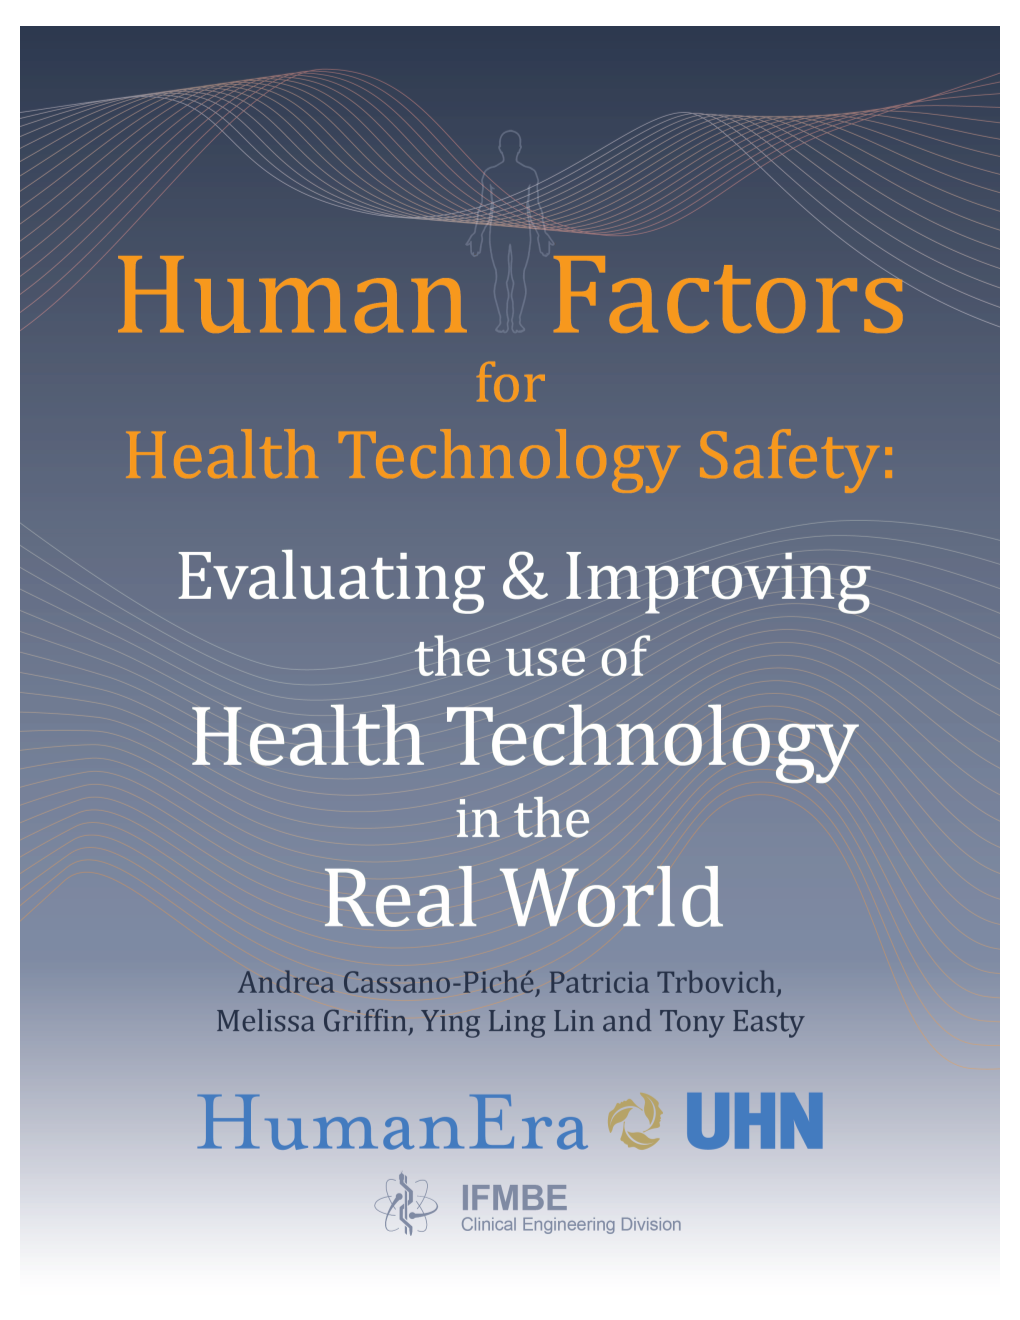 Human Factors Health Technology Safety